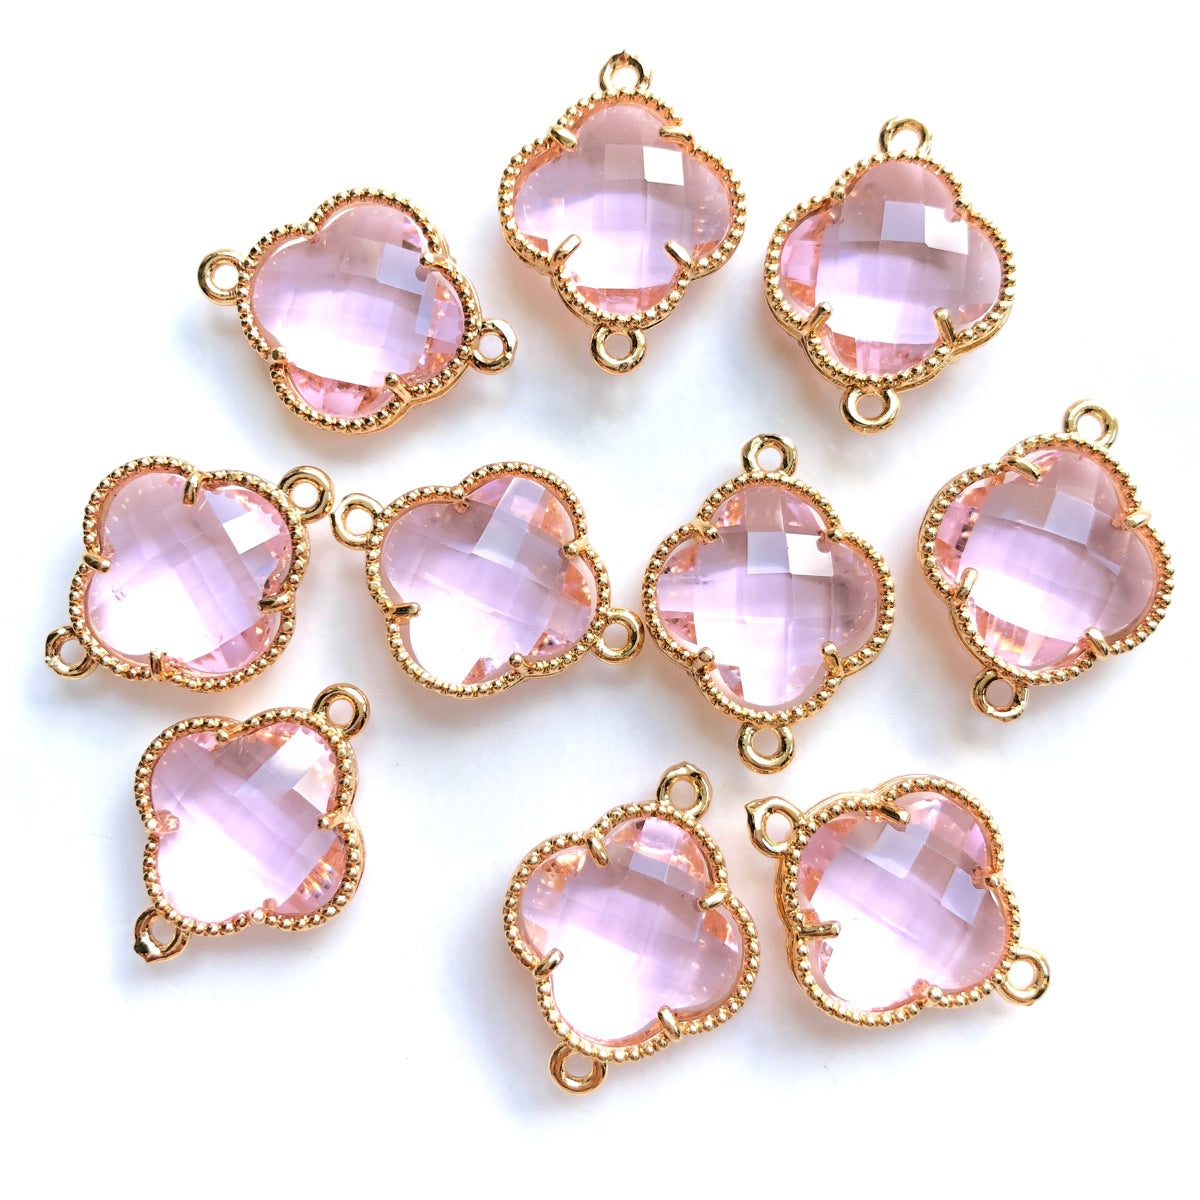 10pcs/Lot Gold Plated Glass Crystal Clover Flower Connectors Pink Stone Charms Flower Glass Beads New Charms Arrivals Charms Beads Beyond